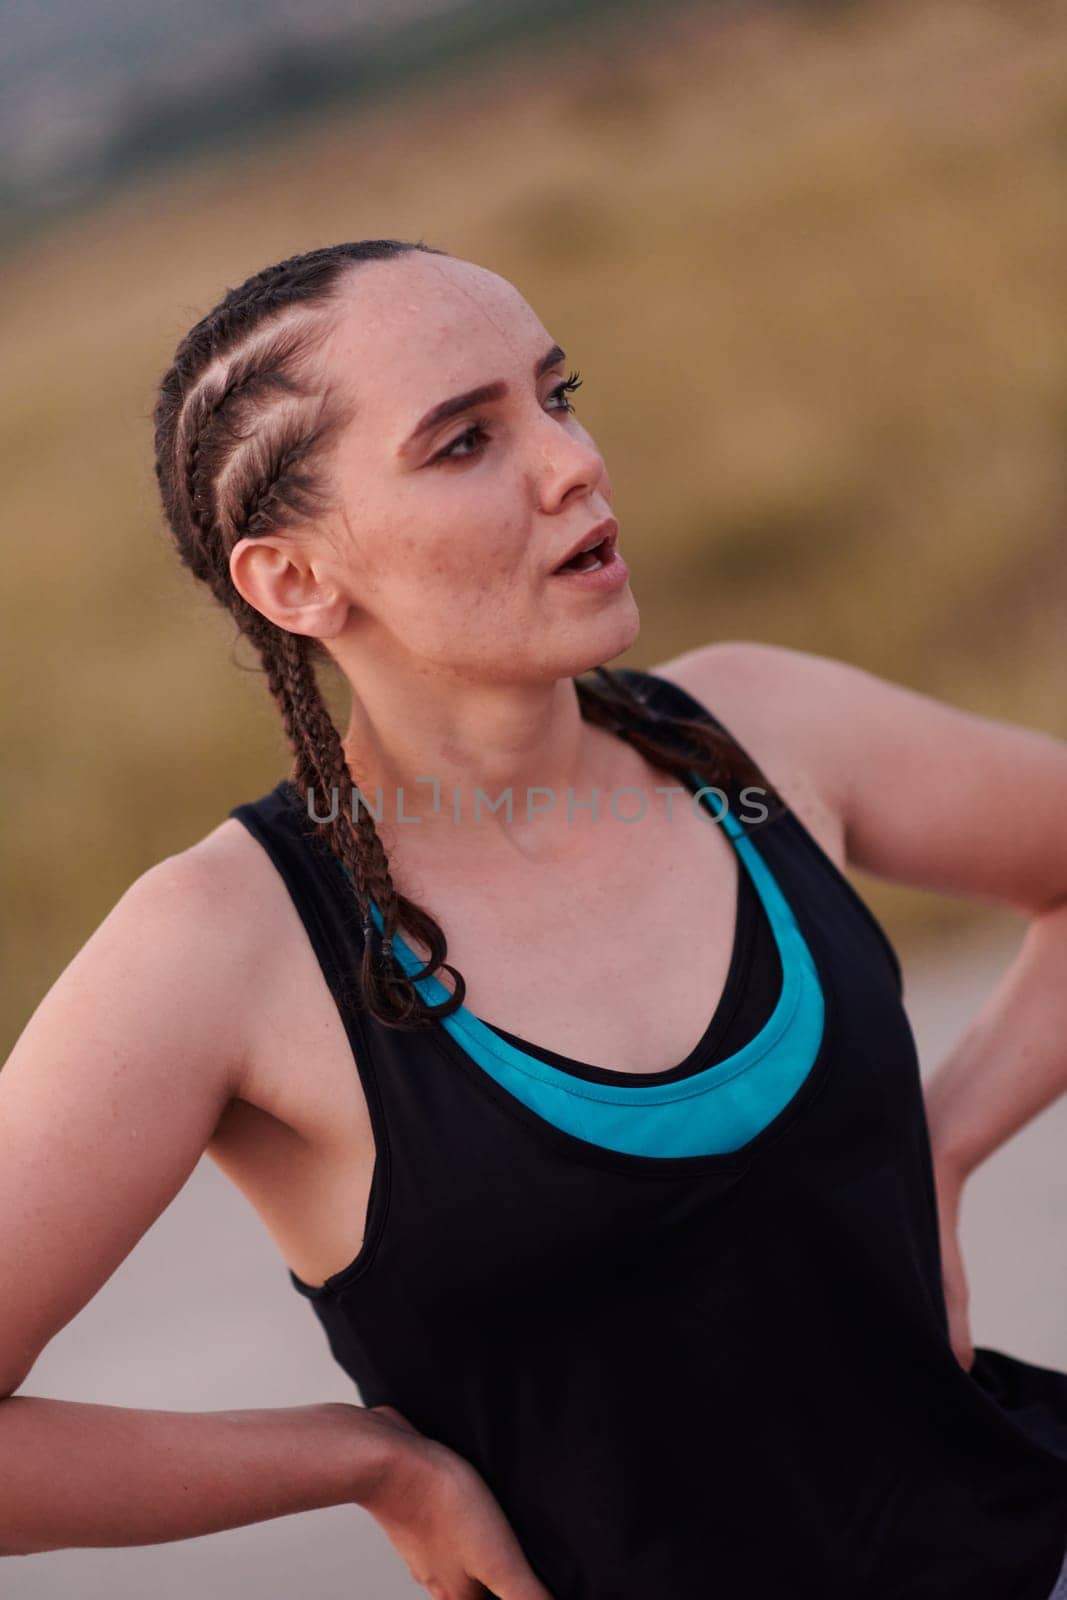 A close-up captures the raw dedication of a female athlete as she rests, sweat glistening, after a rigorous running session, embodying the true spirit of perseverance and commitment to her fitness journey